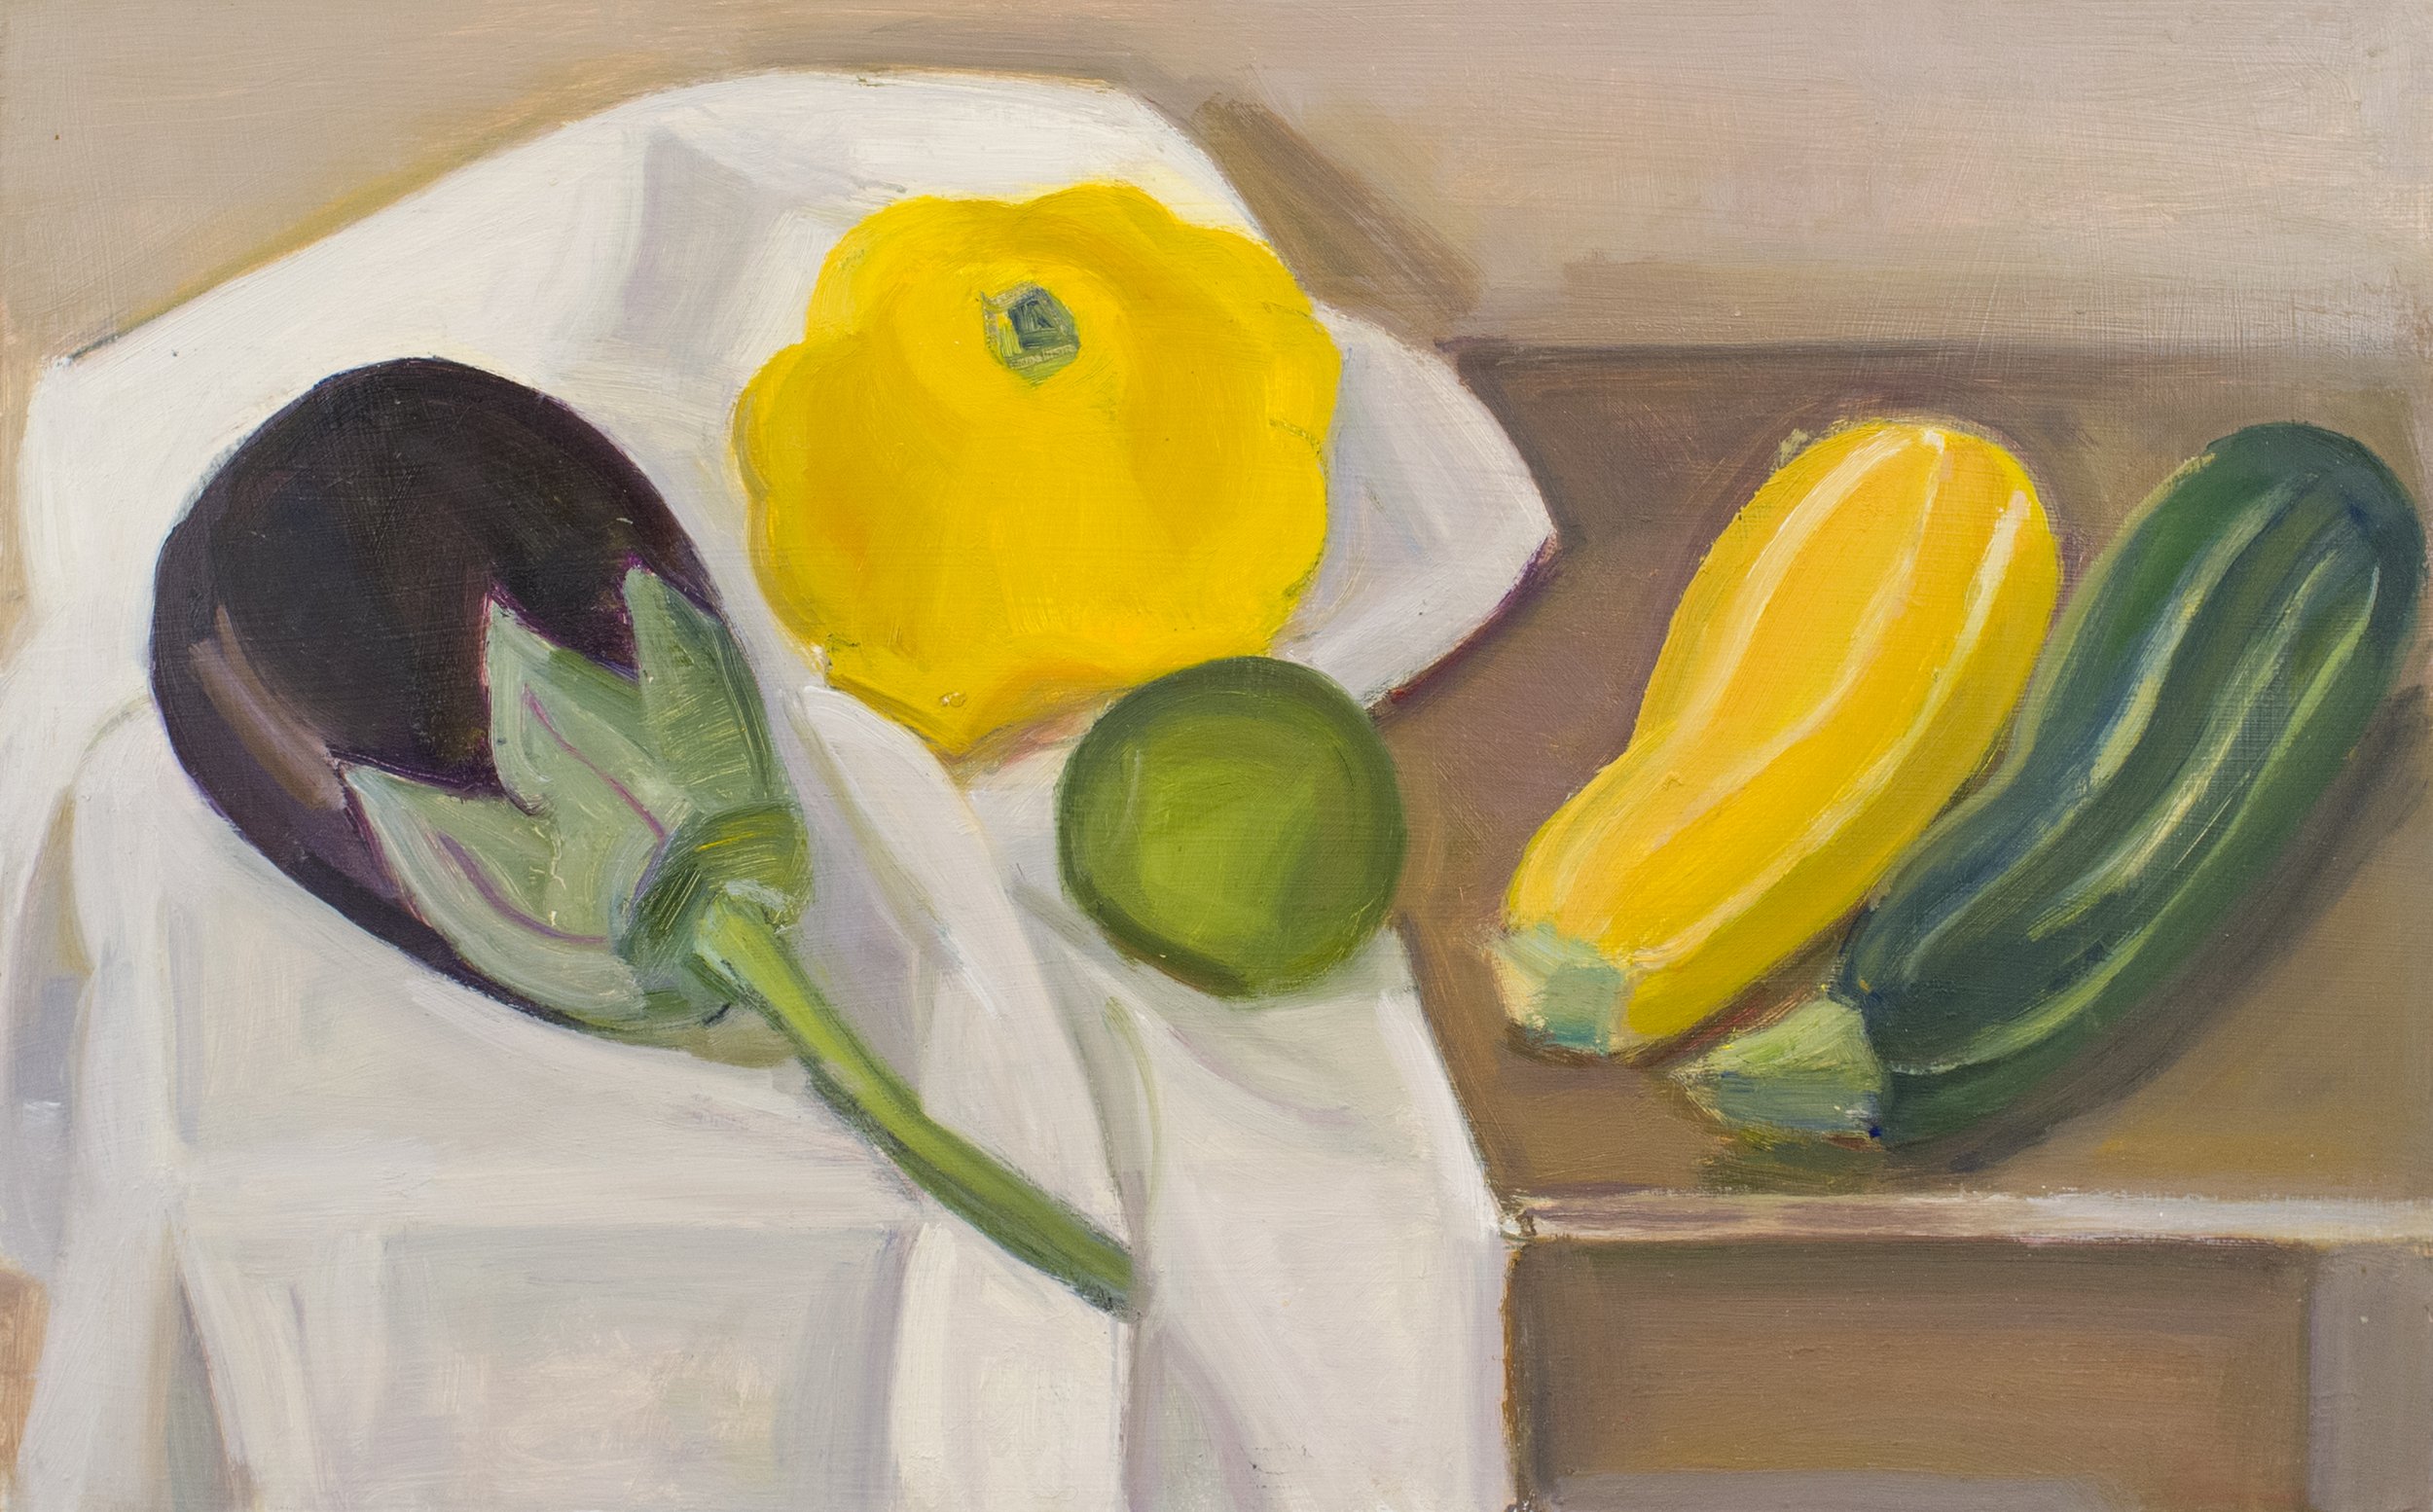   Eggplant, Pattypan and Two Striped Squash, with Lime , c. 2015, oil/panel (signed and framed), 10 x 16 in., $1,200 